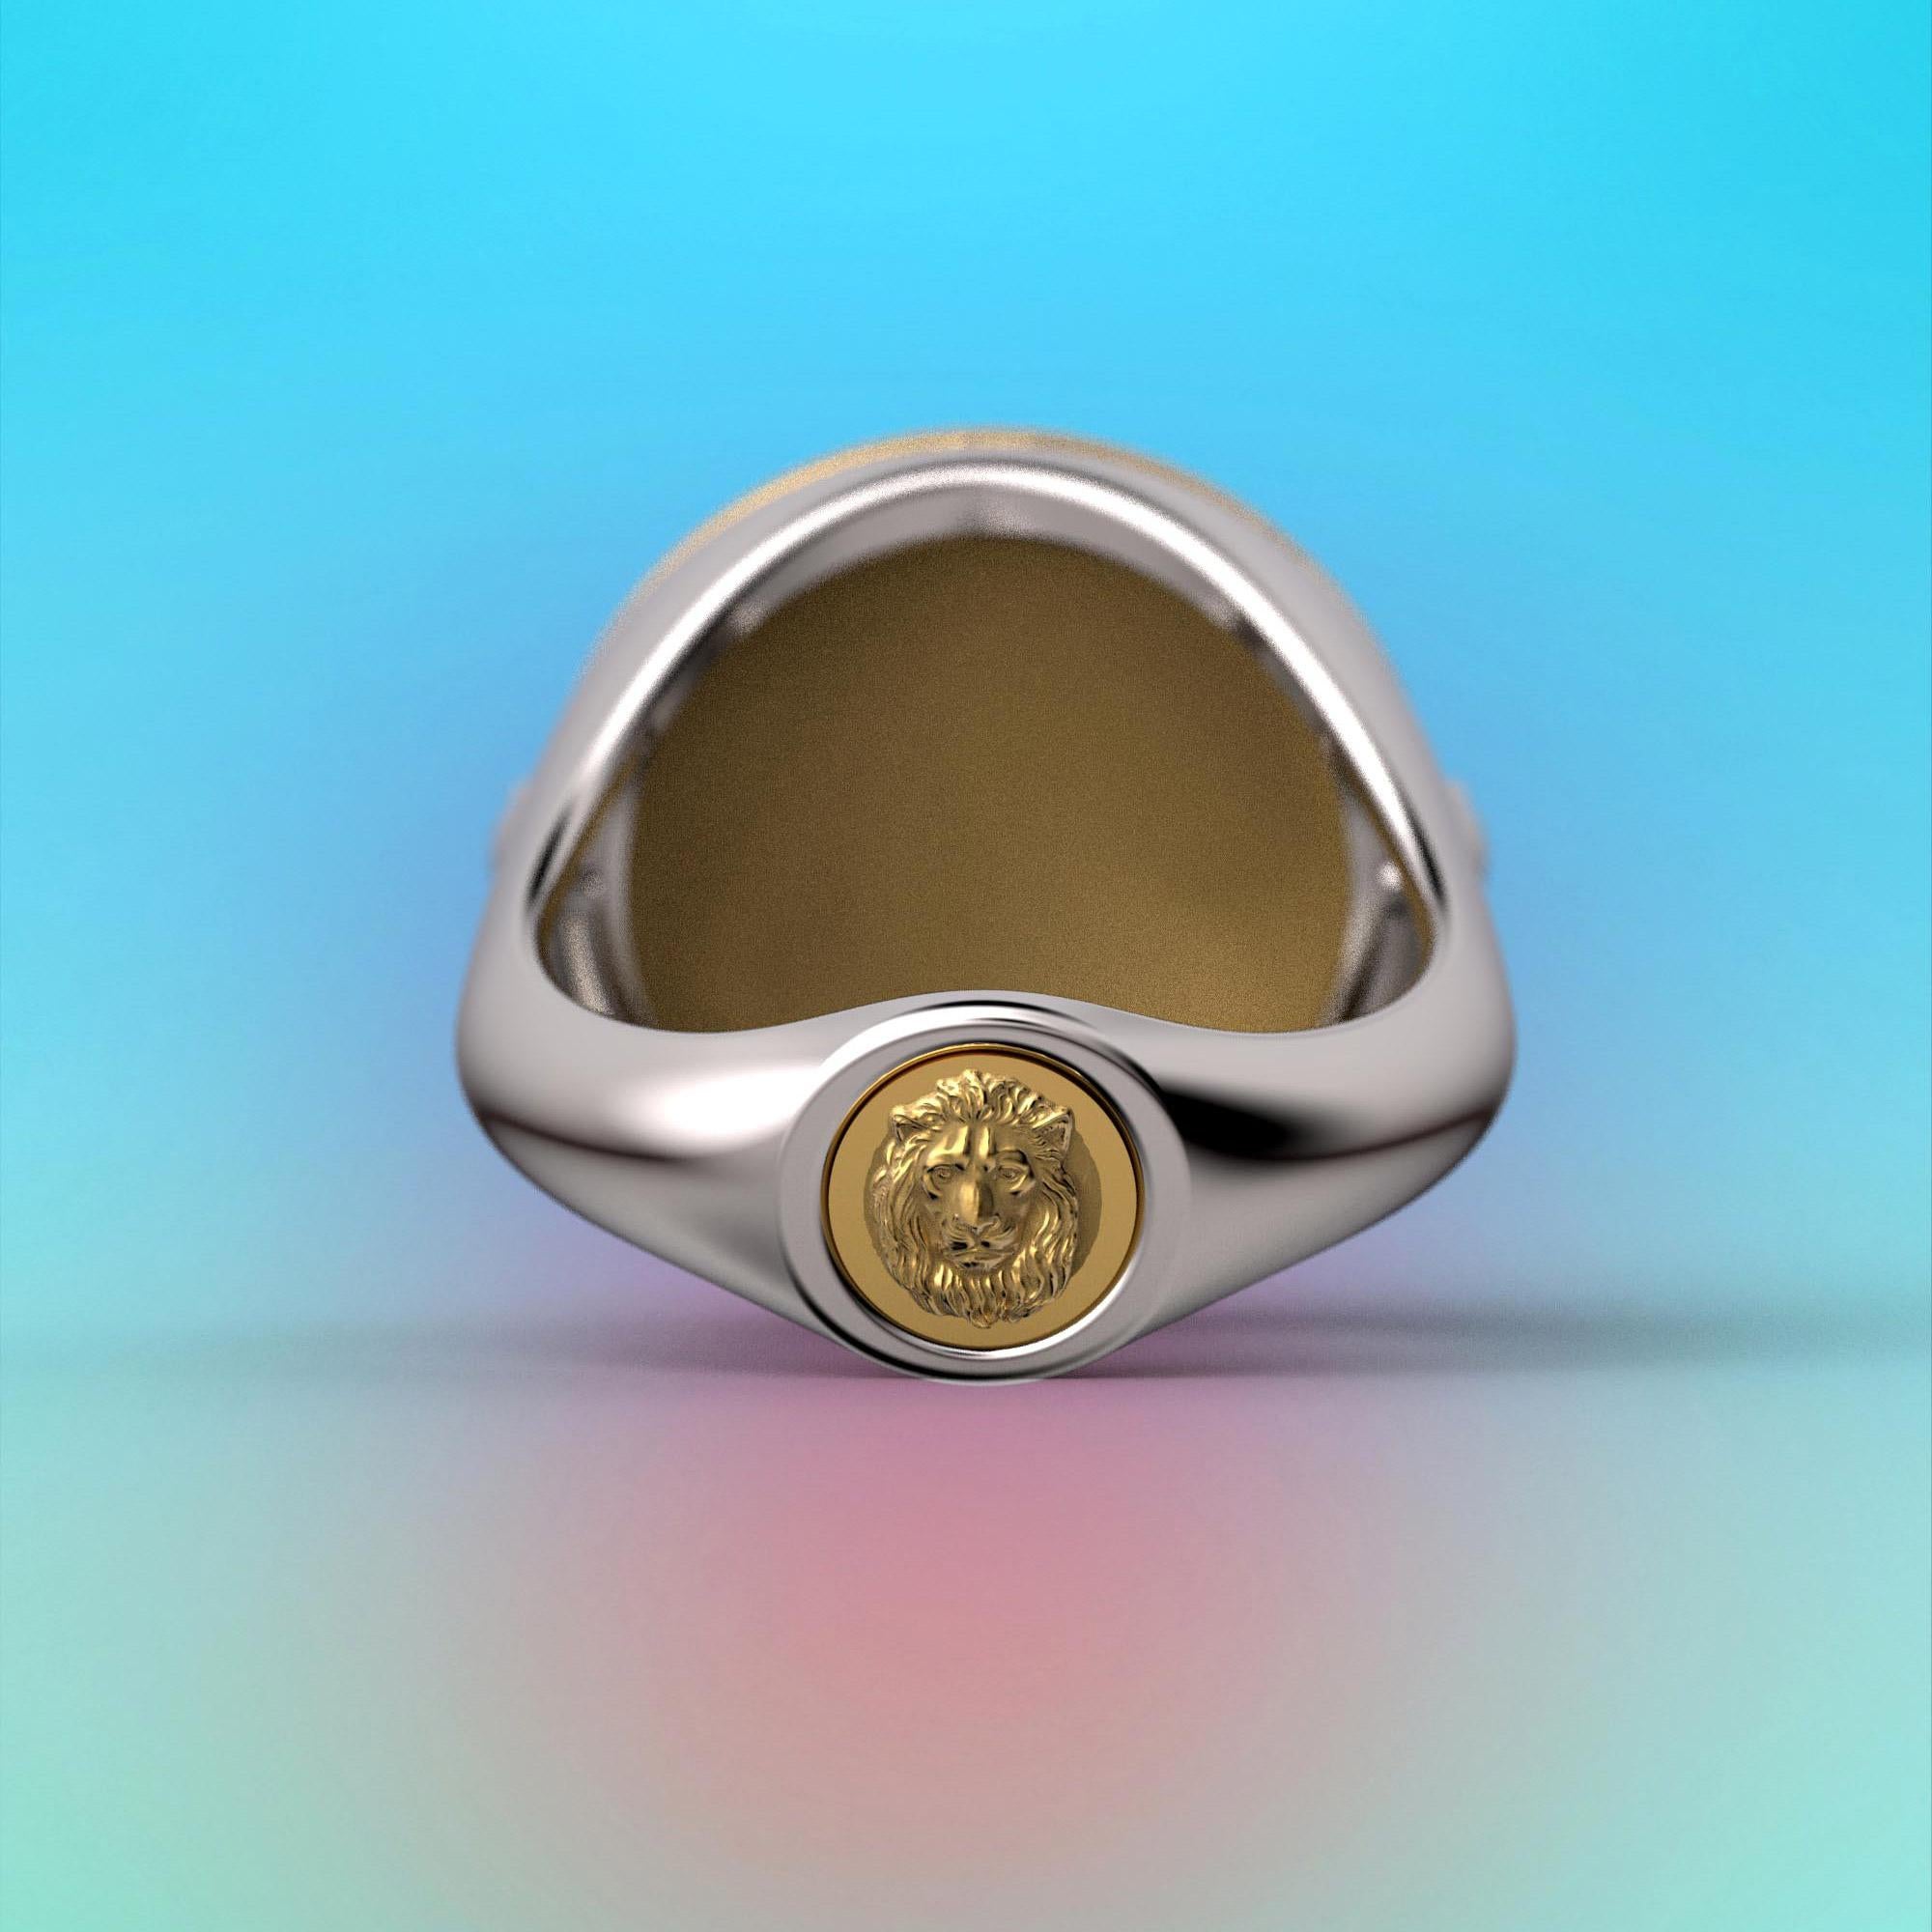 For Sale:  18k Ancient Roman Style Gold Coin Ring with a reproduction of a Roman Solidus 6